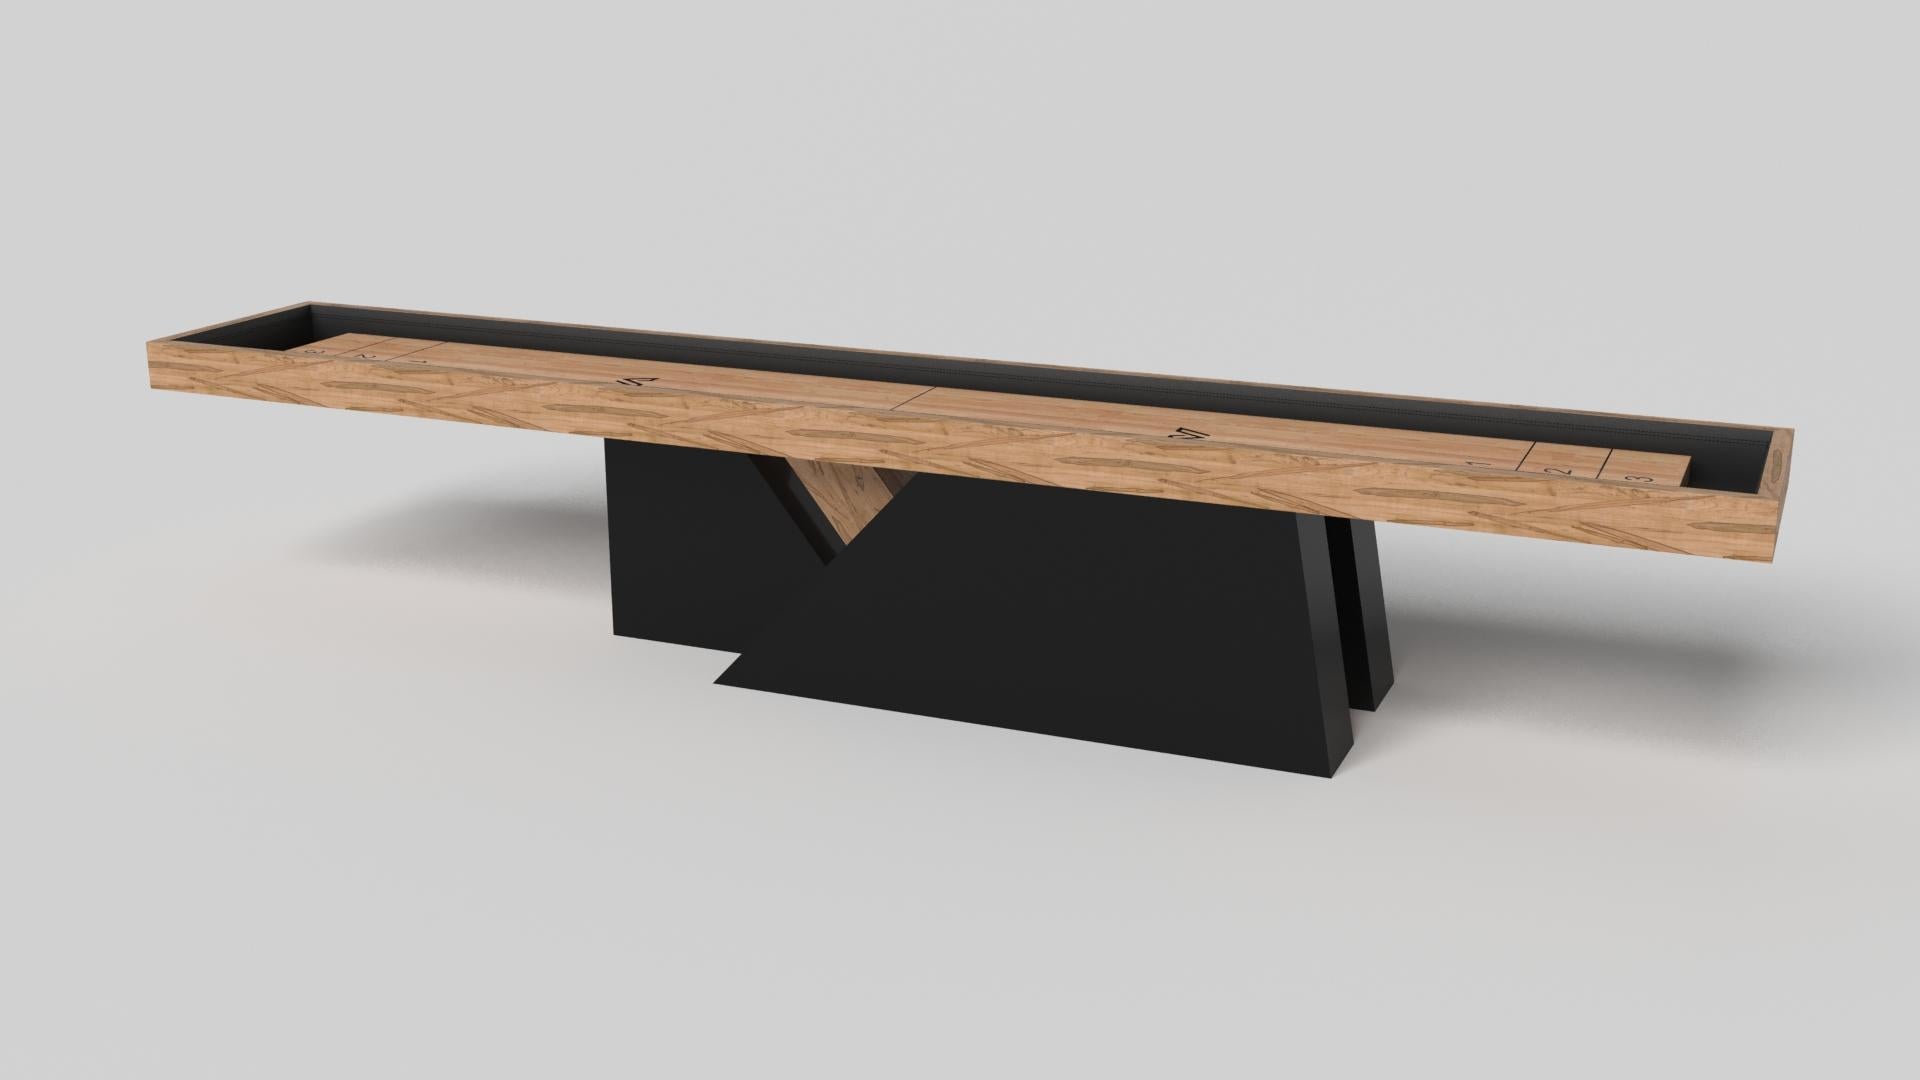 An asymmetric base creates a free-floating silhouette, making the Stilt shuffleboard table in chrome with walnut a compelling, contemporary addition to the modern home. Crafted from durable metal with solid walnut wood accents, this luxury